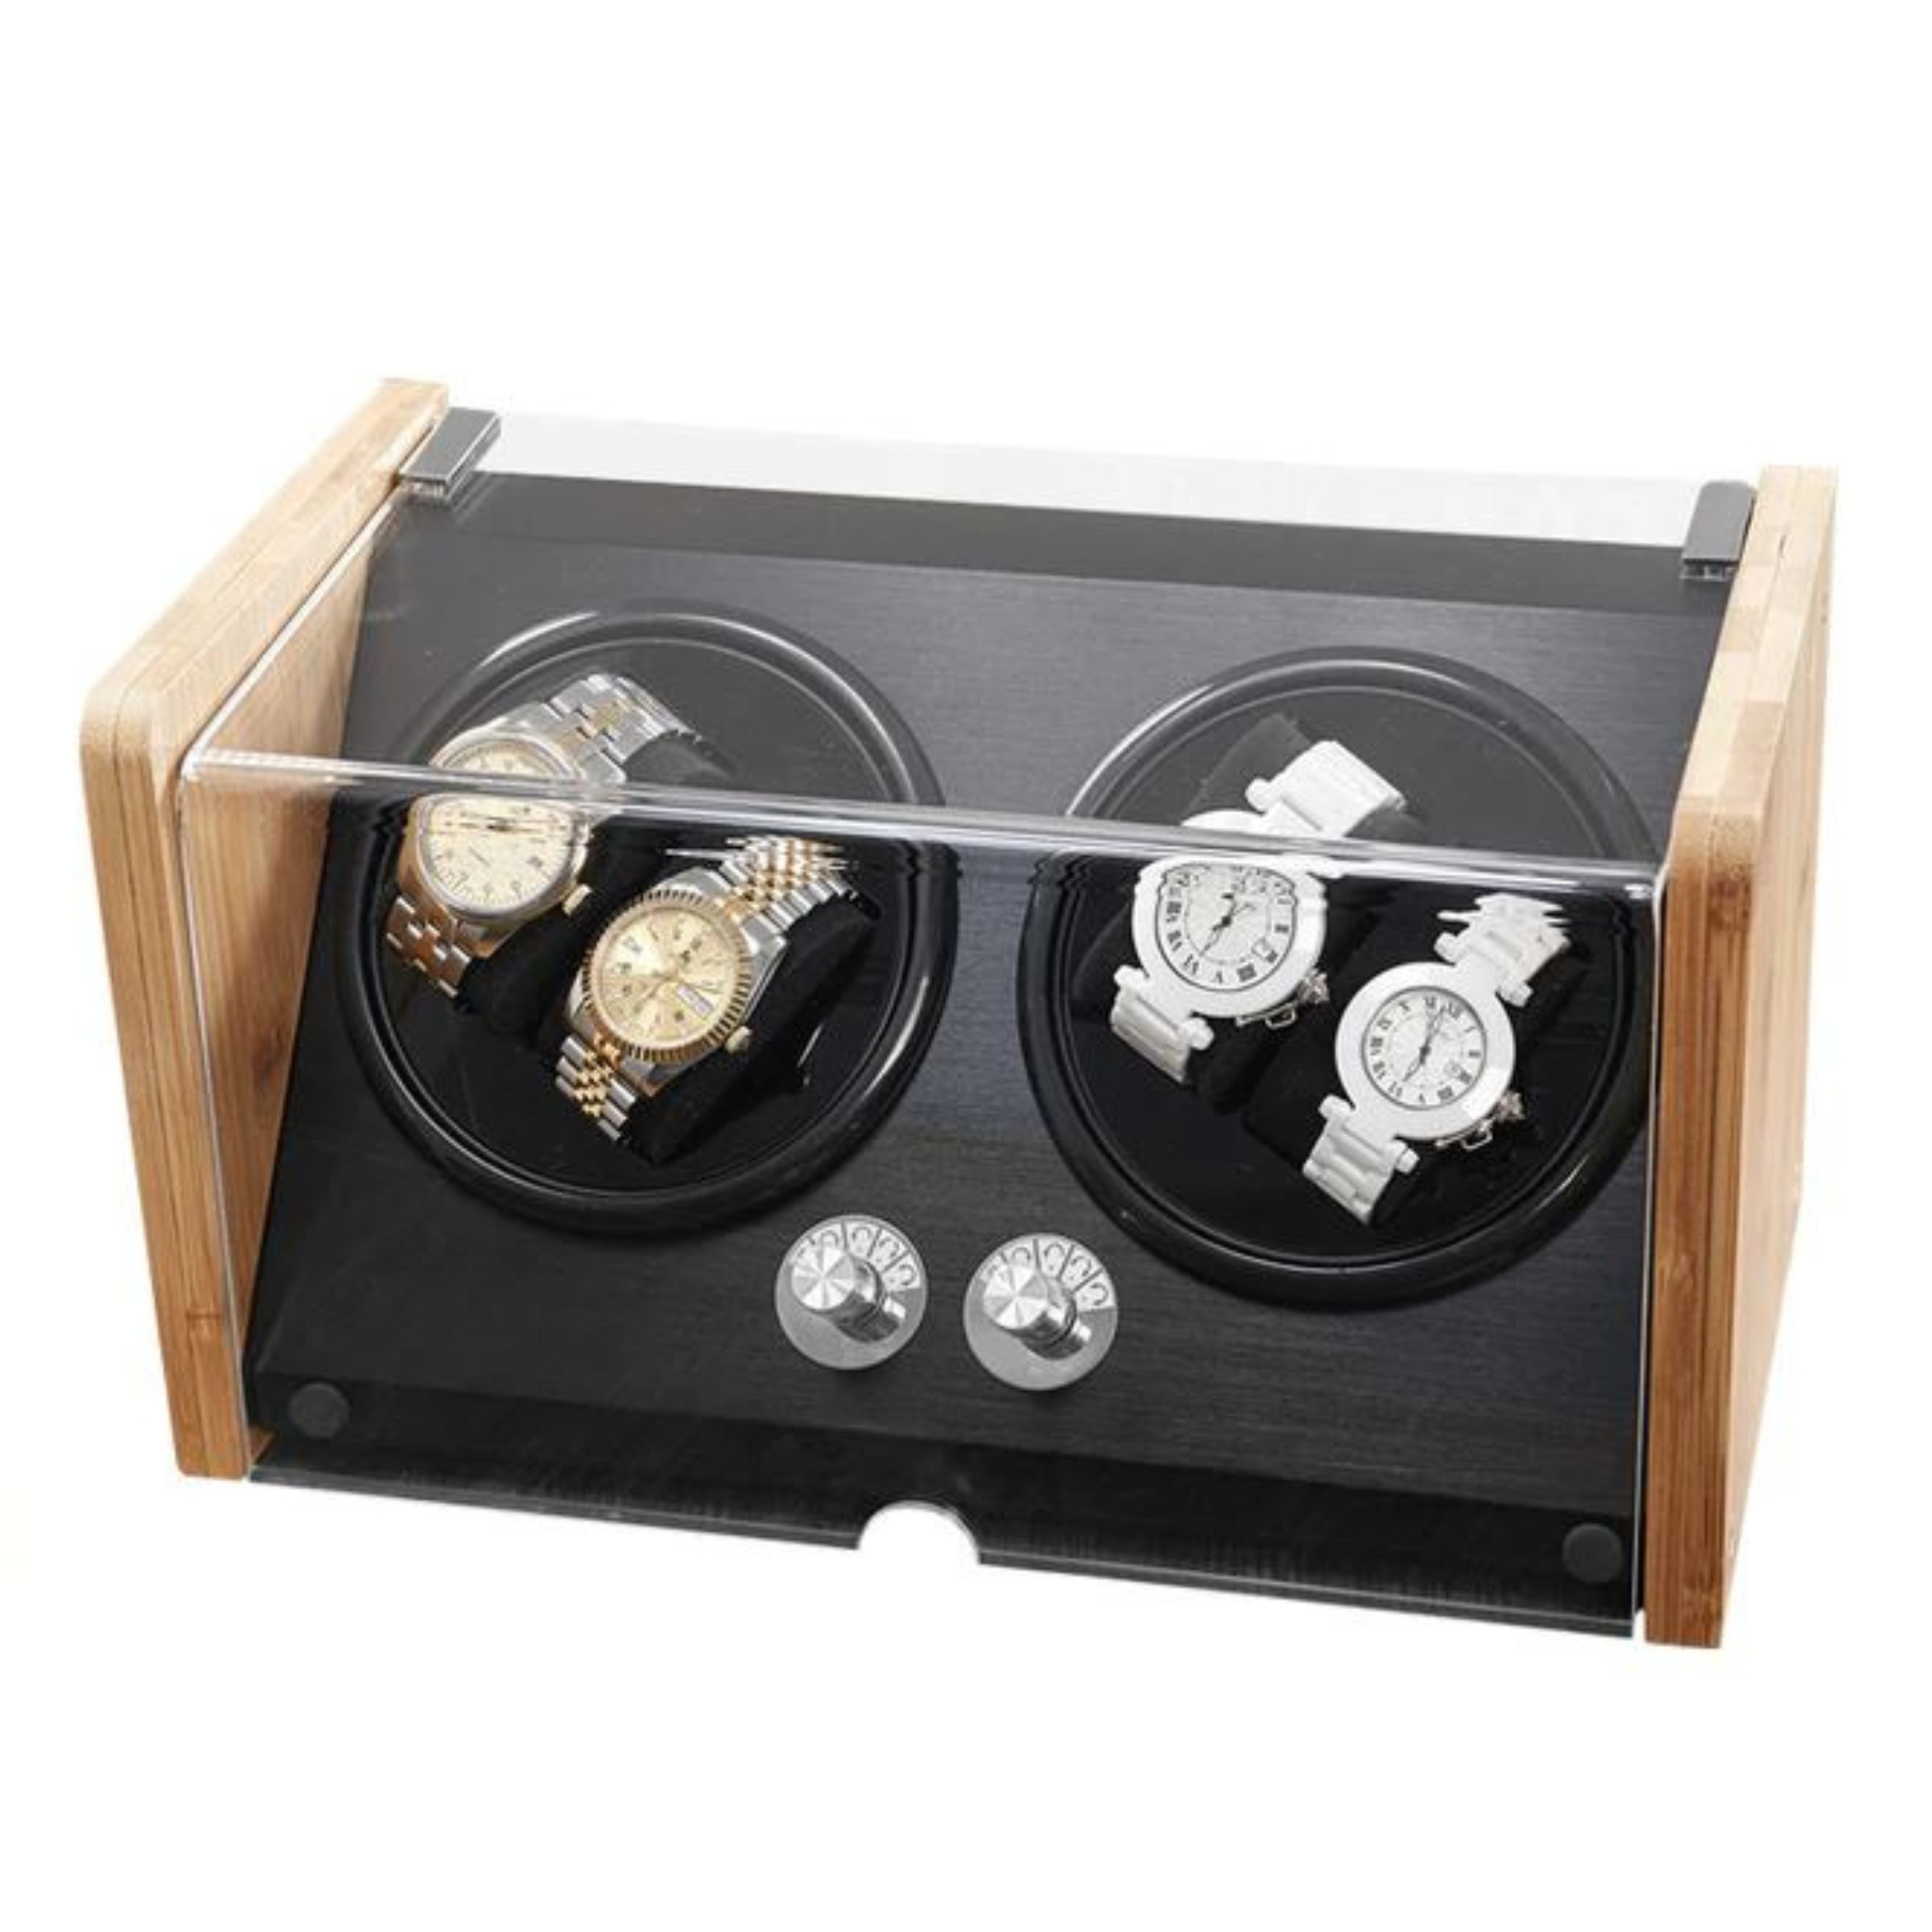 BLAQ Bamboo/Black Watch Winder Box for 4 Watches